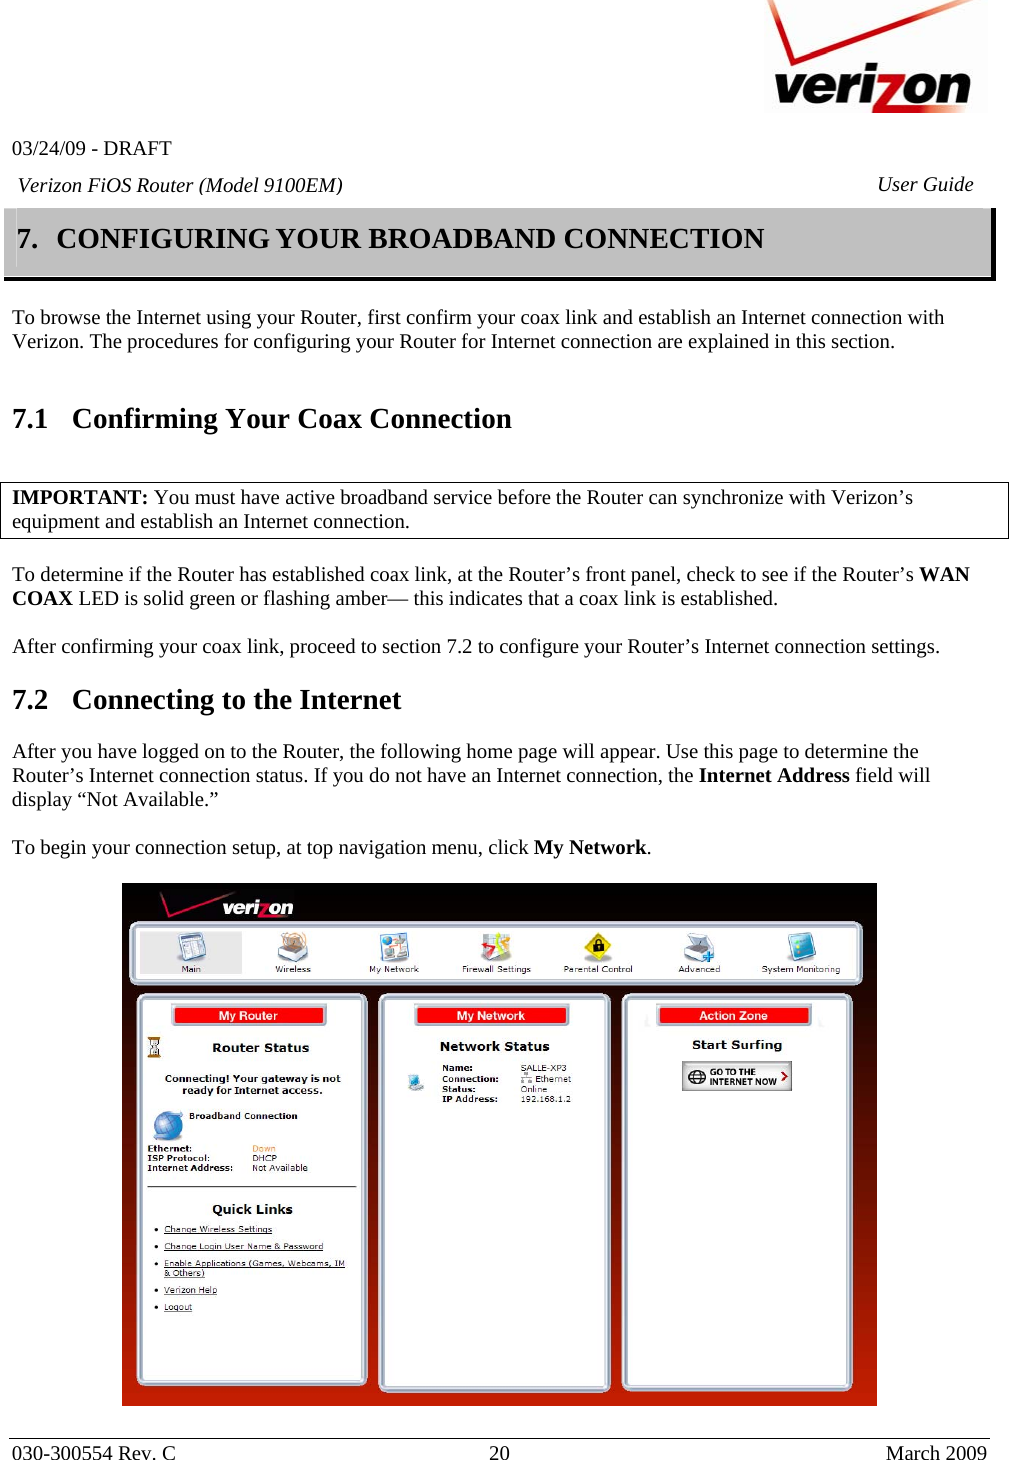   03/24/09 - DRAFT   030-300554 Rev. C  20      March 2009  Verizon FiOS Router (Model 9100EM) User Guide7. CONFIGURING YOUR BROADBAND CONNECTION   To browse the Internet using your Router, first confirm your coax link and establish an Internet connection with Verizon. The procedures for configuring your Router for Internet connection are explained in this section.   7.1 Confirming Your Coax Connection   IMPORTANT: You must have active broadband service before the Router can synchronize with Verizon’s equipment and establish an Internet connection.   To determine if the Router has established coax link, at the Router’s front panel, check to see if the Router’s WAN COAX LED is solid green or flashing amber— this indicates that a coax link is established.   After confirming your coax link, proceed to section 7.2 to configure your Router’s Internet connection settings.   7.2 Connecting to the Internet  After you have logged on to the Router, the following home page will appear. Use this page to determine the Router’s Internet connection status. If you do not have an Internet connection, the Internet Address field will display “Not Available.”  To begin your connection setup, at top navigation menu, click My Network.     